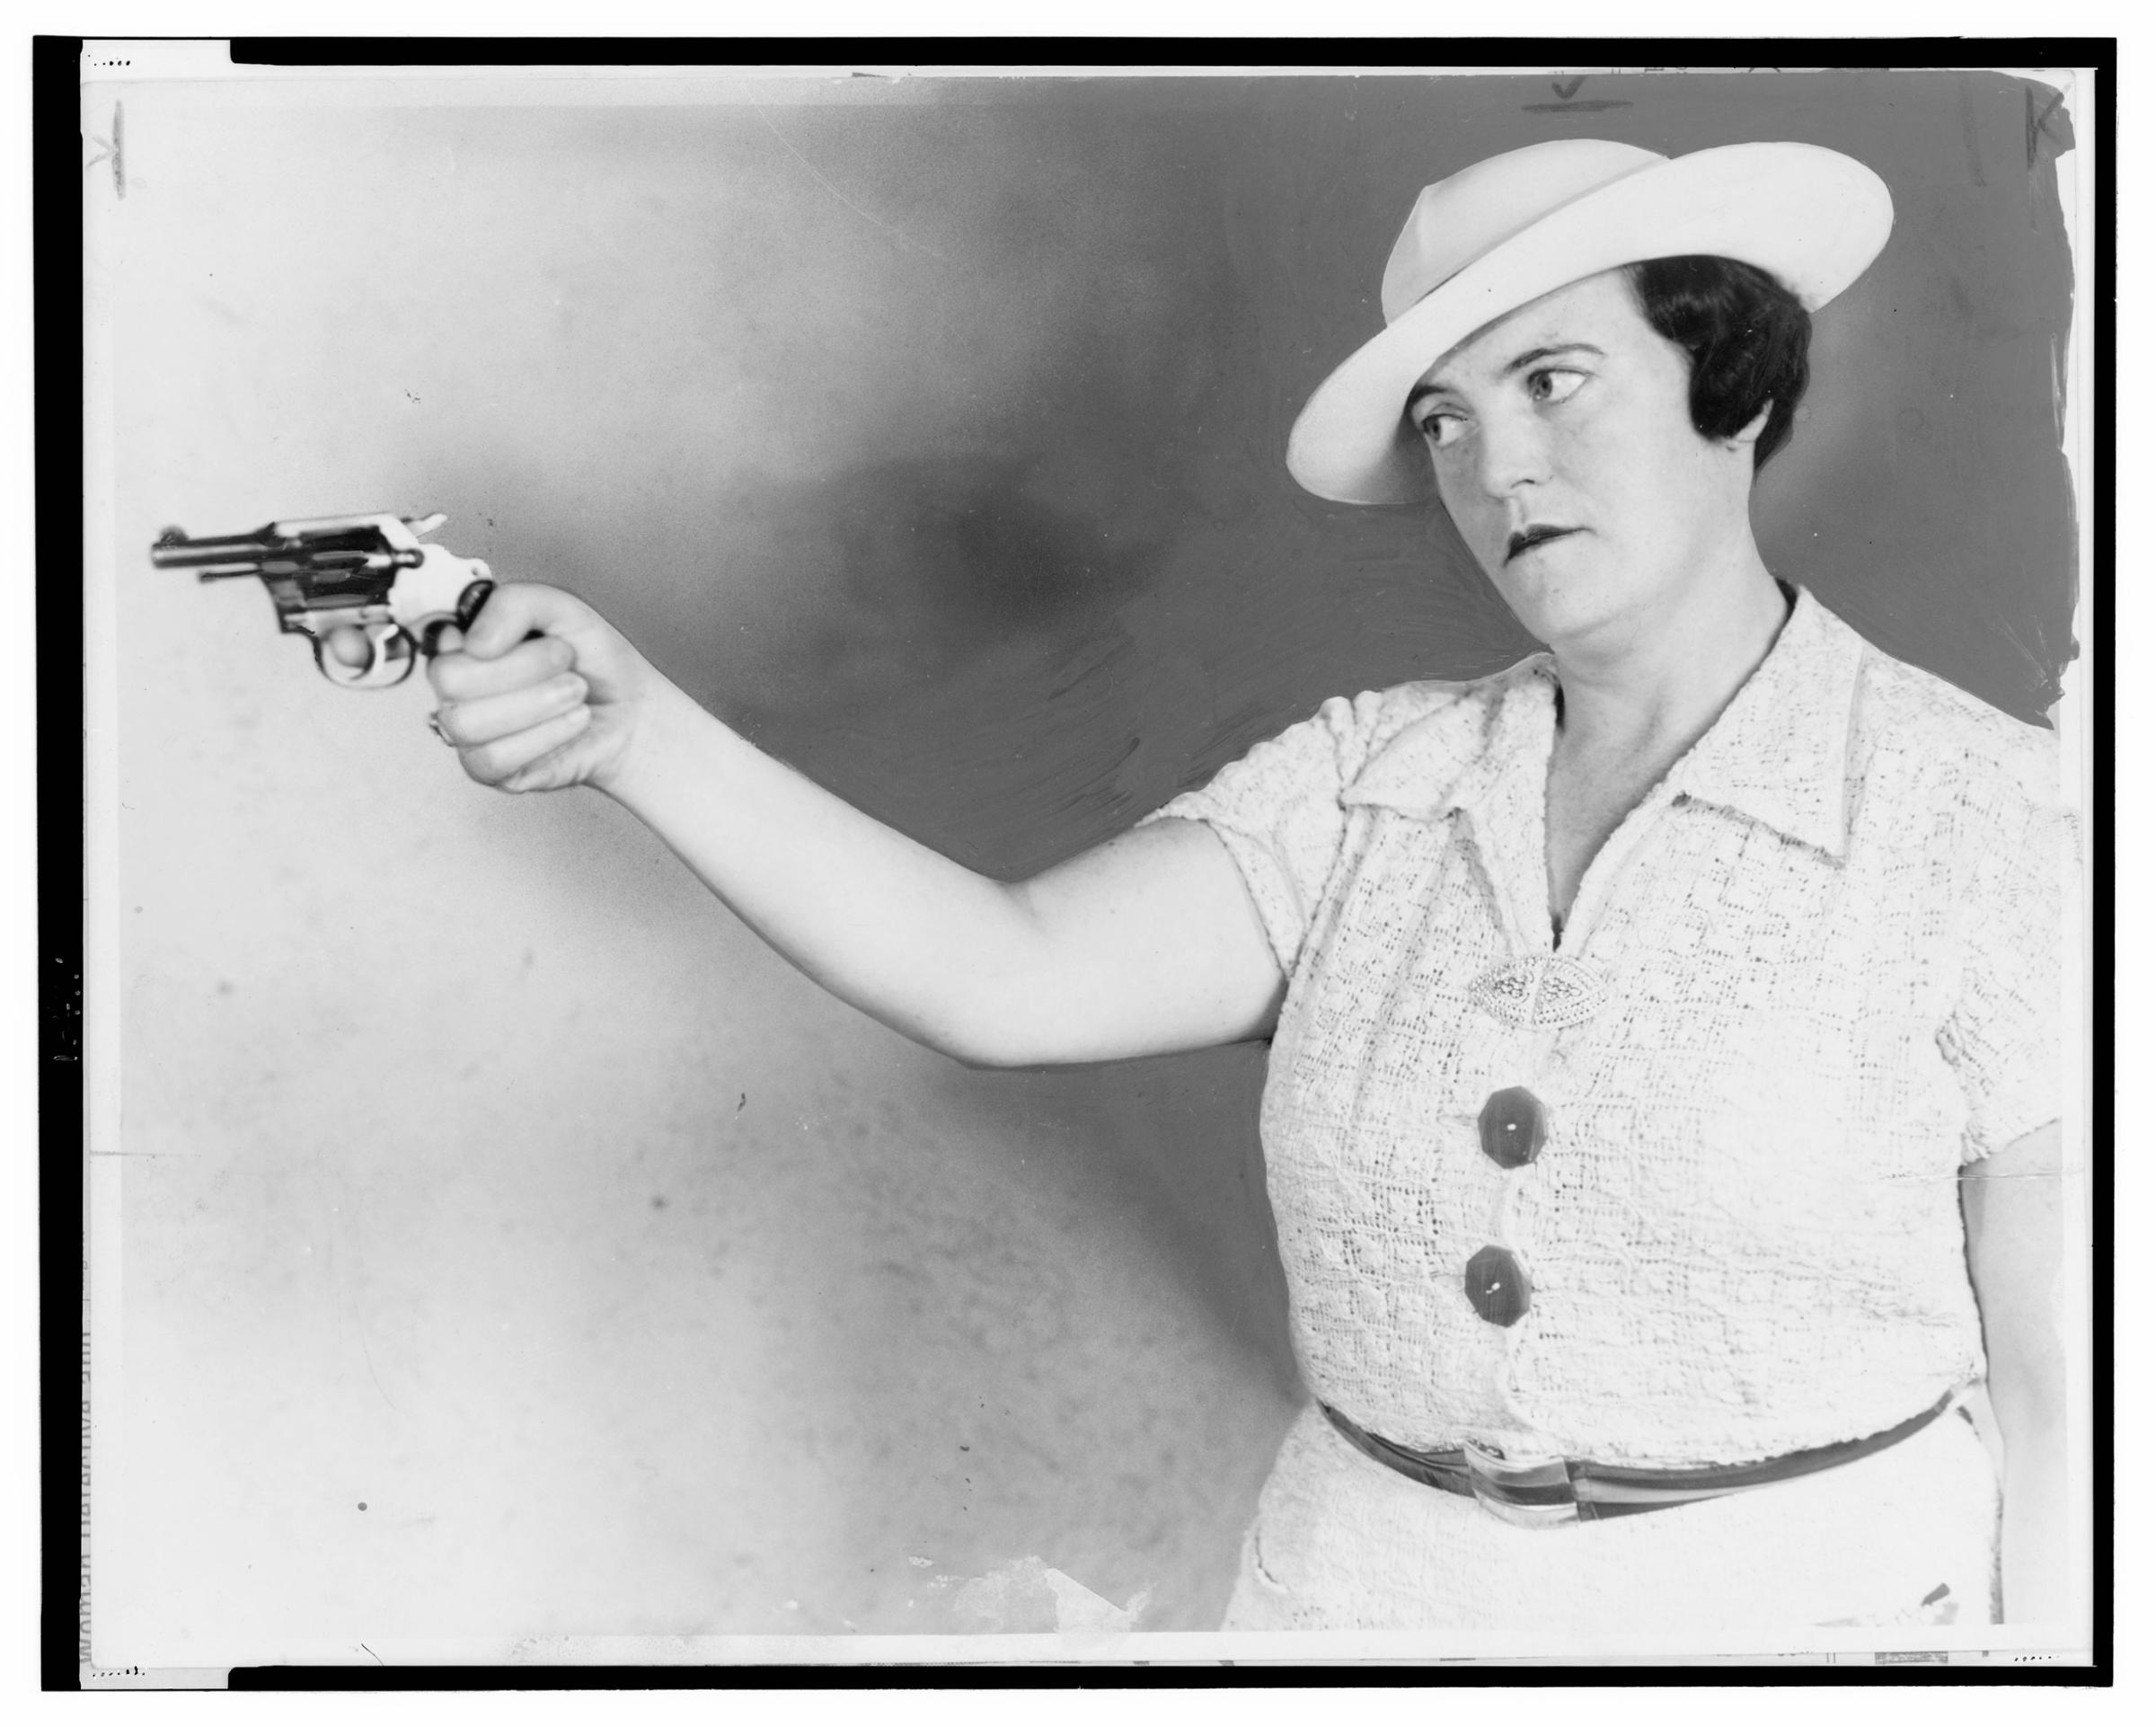 Detective Mary Shanley of the NYPD pickpocket squad was well-known for her skill with a revolver.